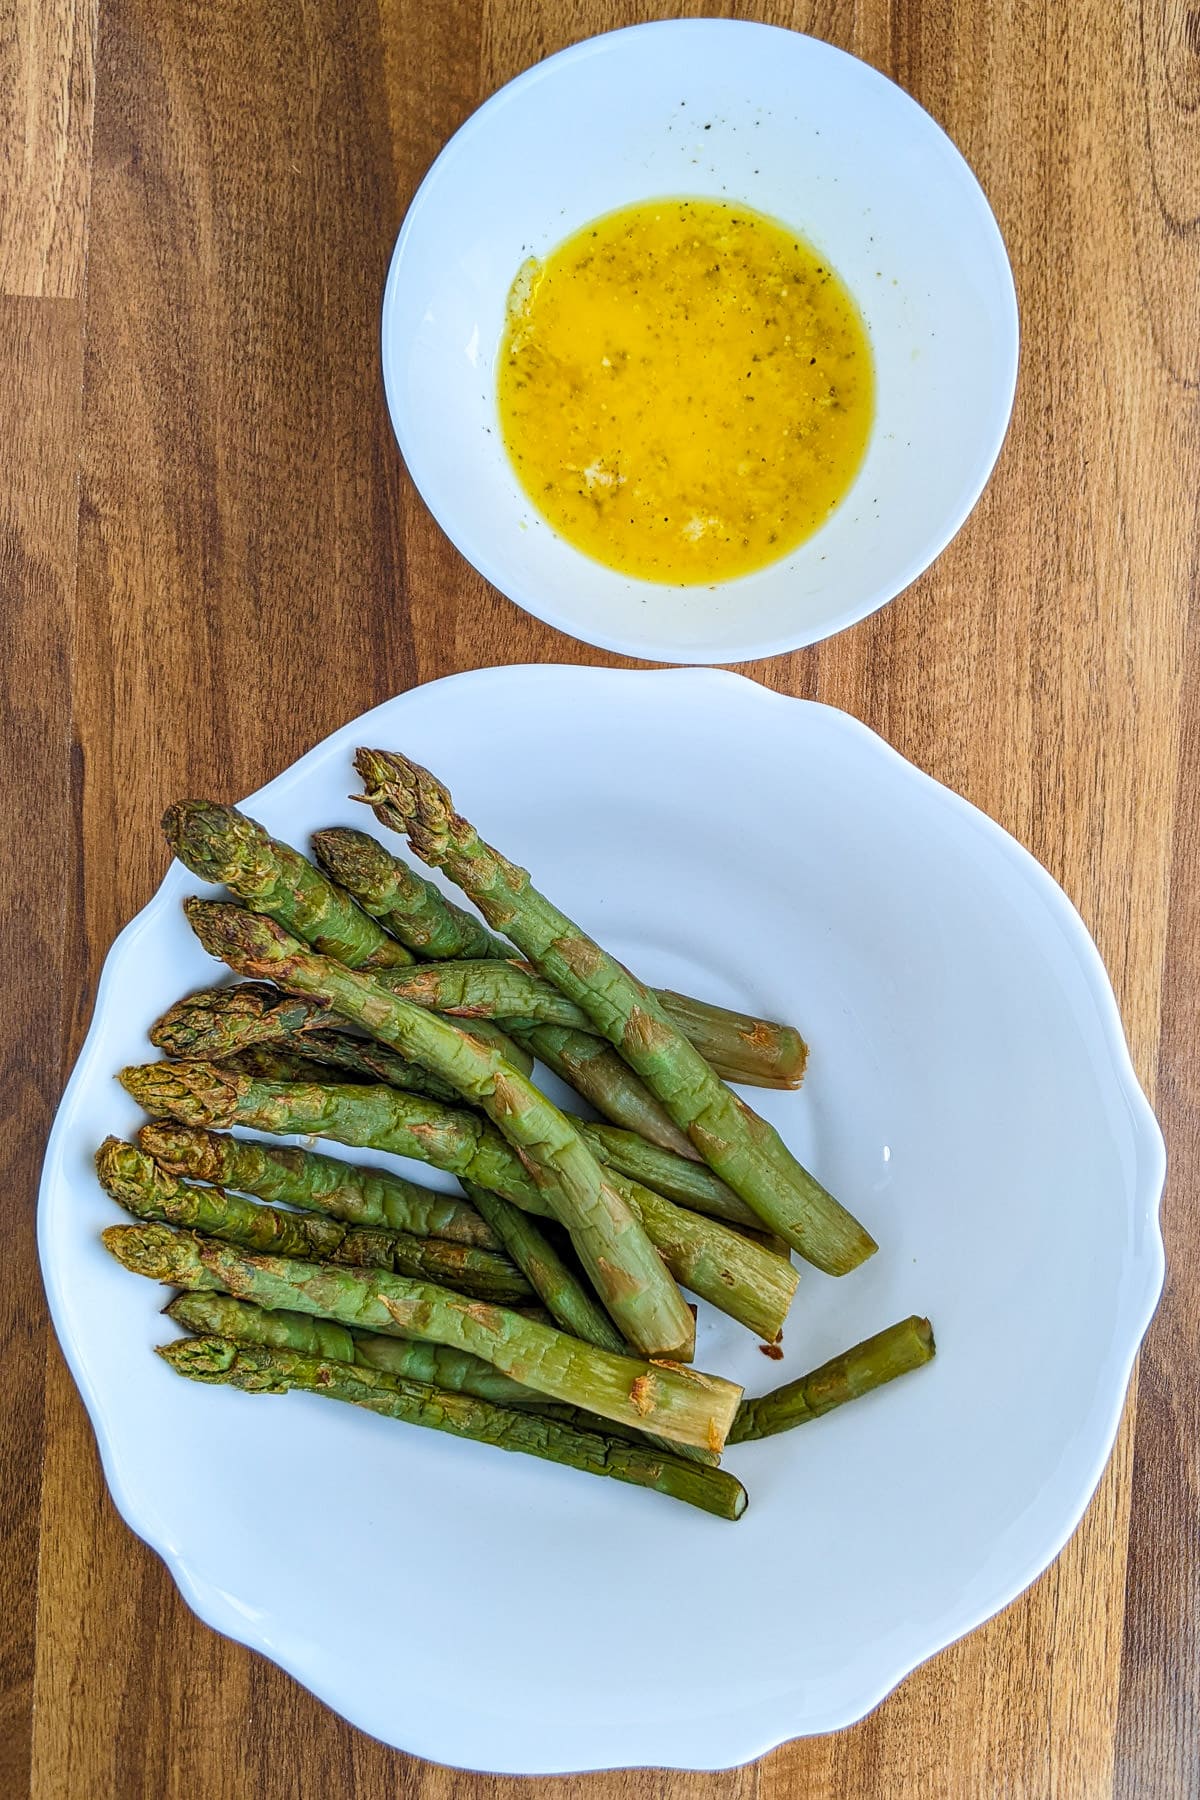 Plate with cooked asparagus near a plate with marinade.